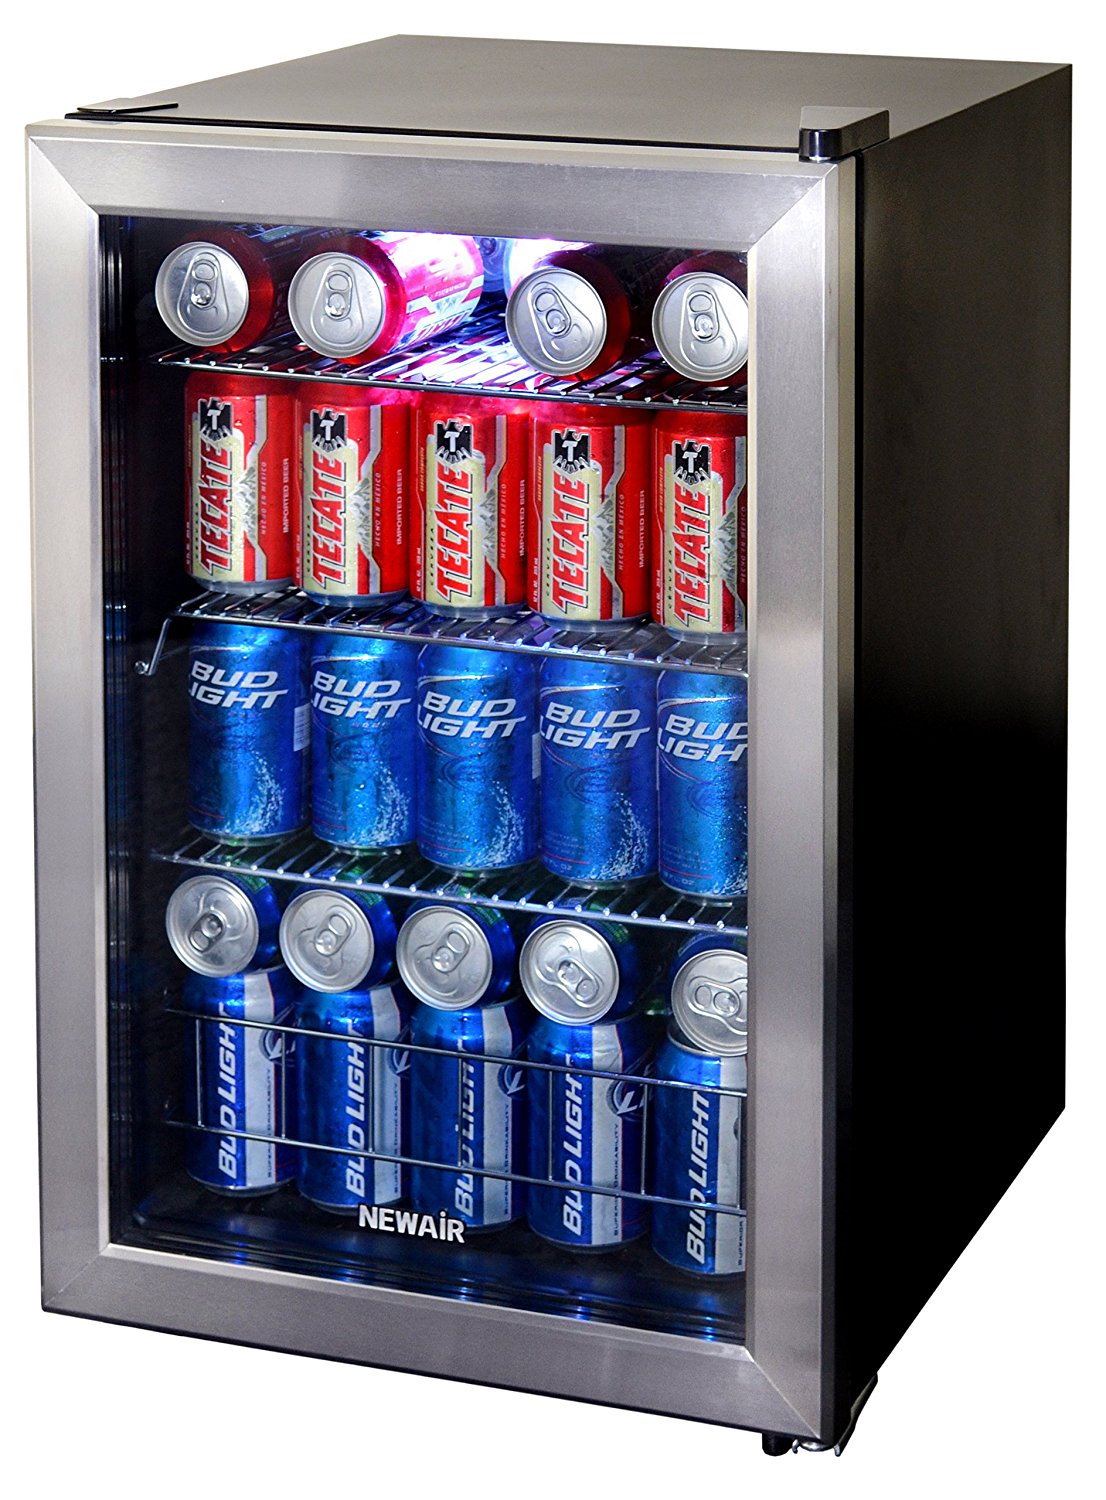 NewAir AB-850 84-Can Beverage Cooler, Cools to 34 Degrees